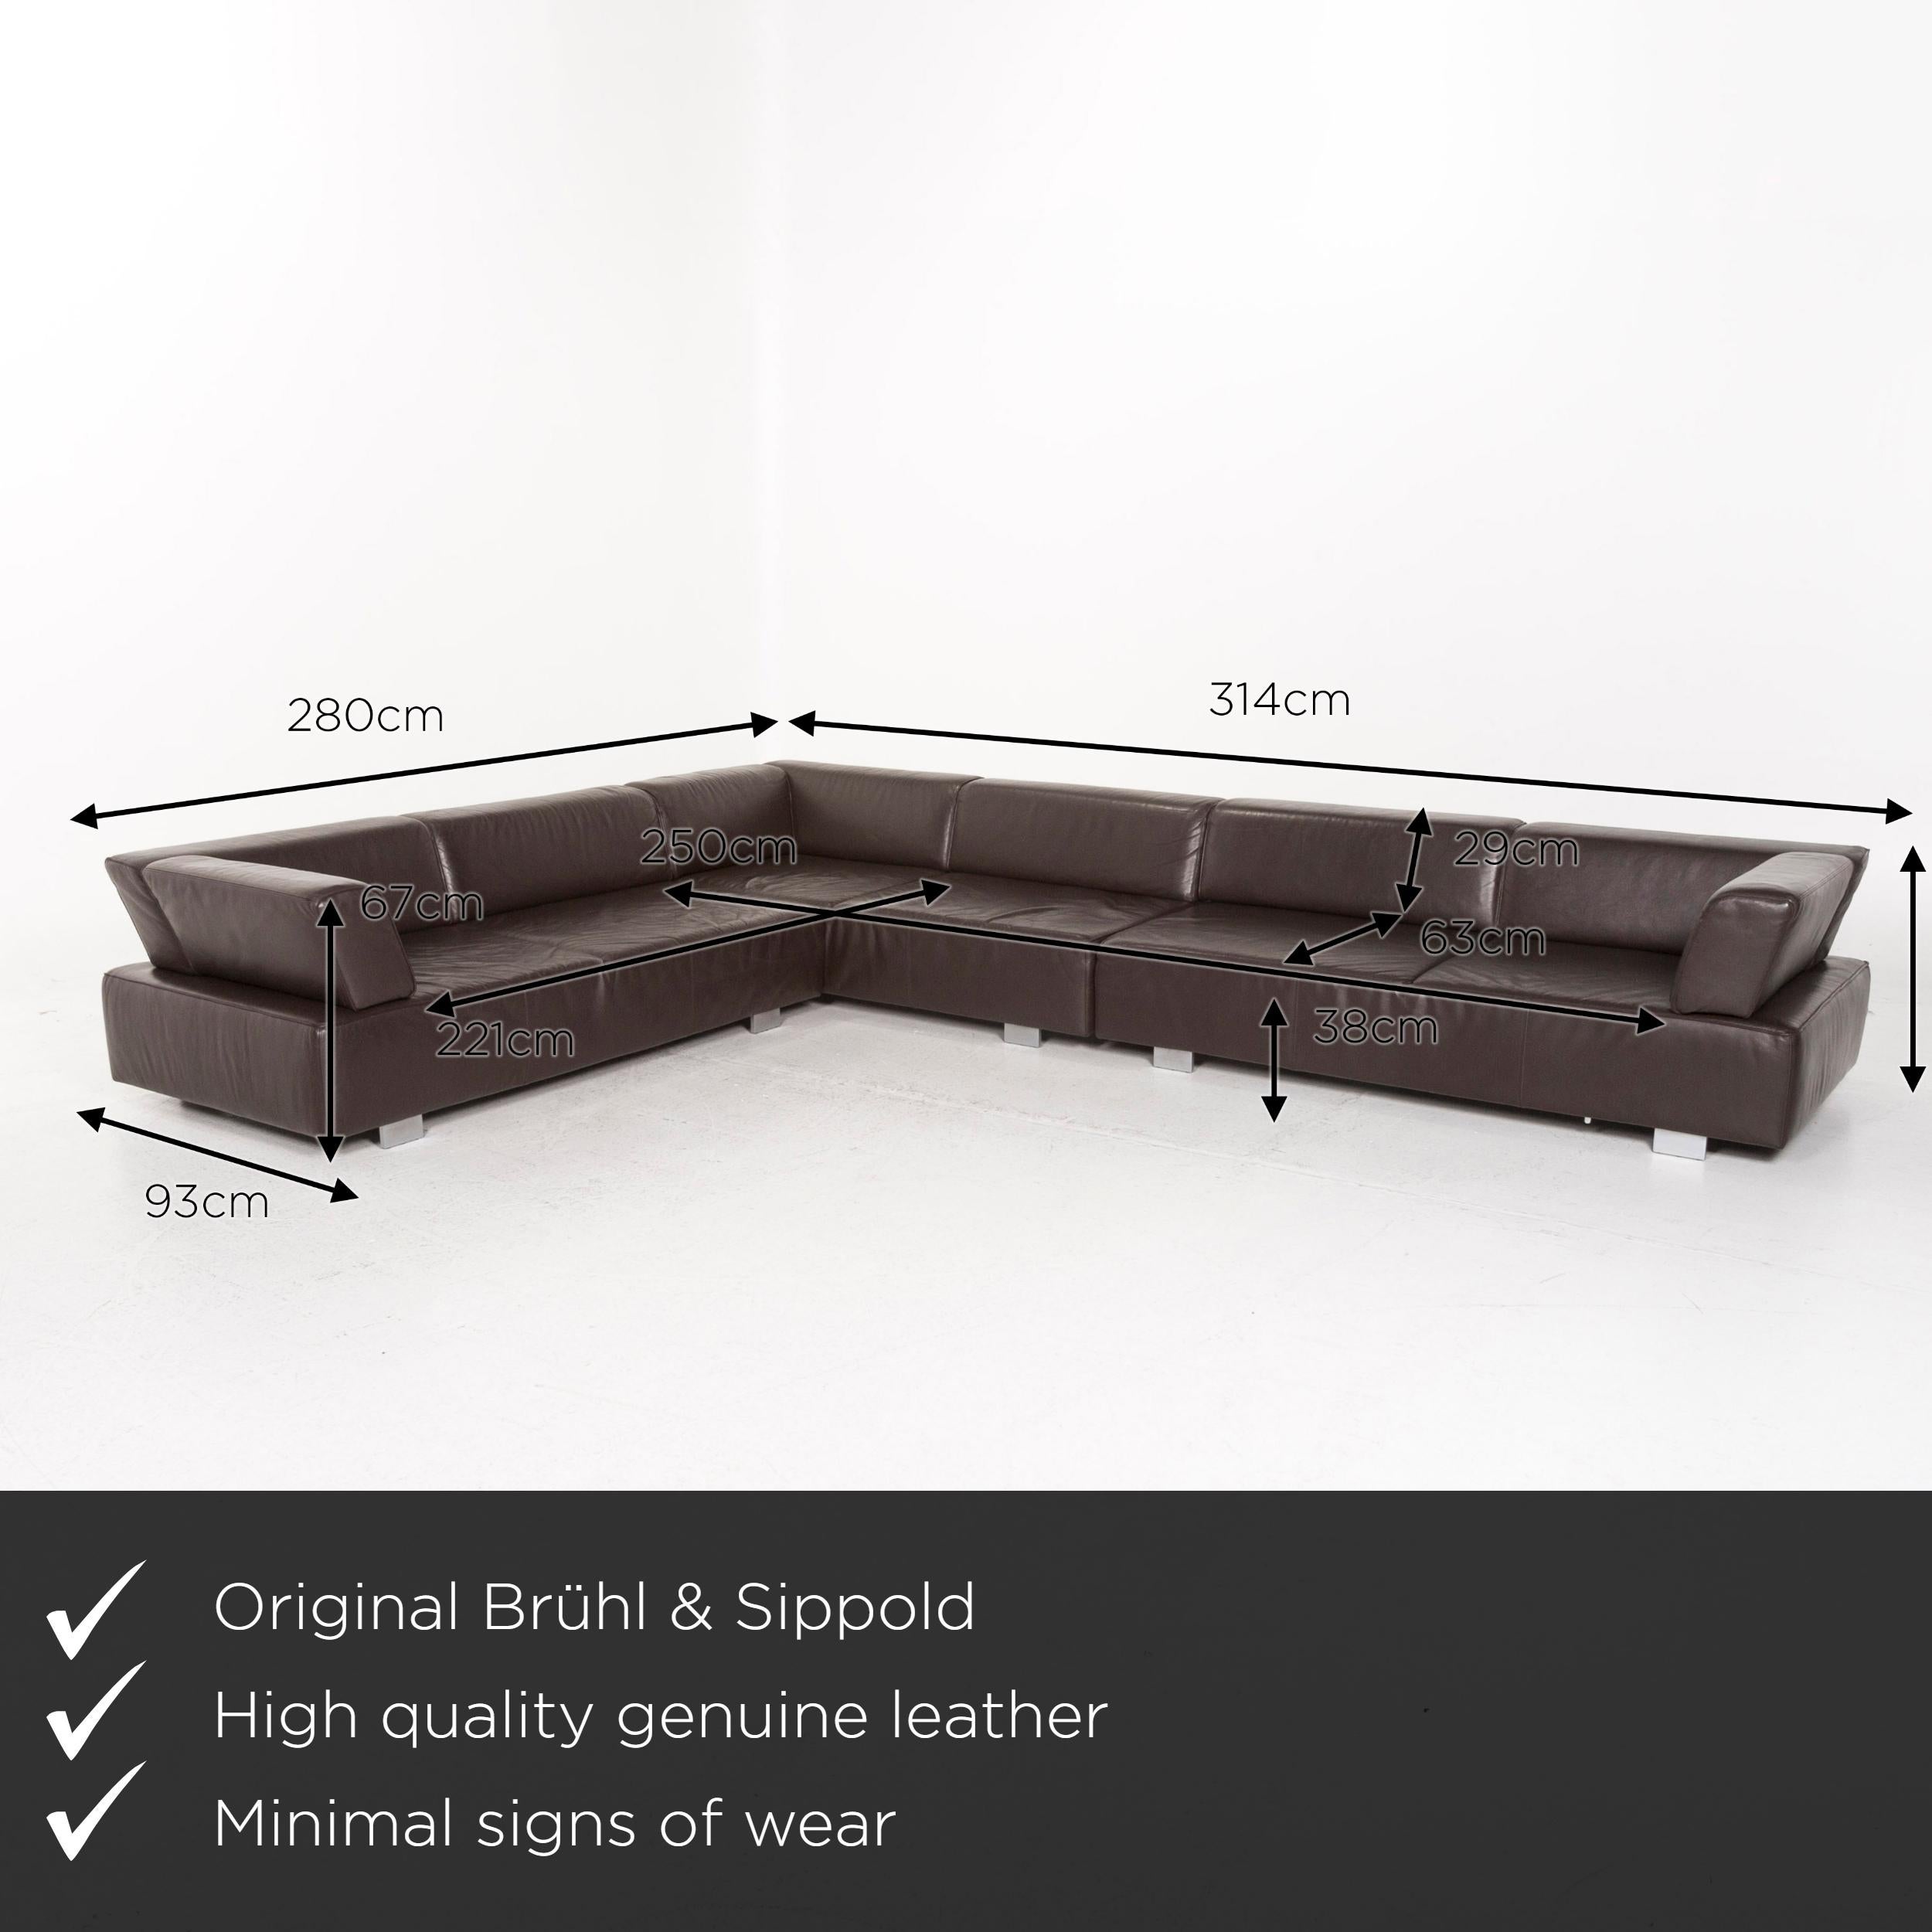 We present to you a Brühl & Sippold leather corner sofa brown dark brown sofa couch.

 

 Product measurements in centimeters:
 

Depth 93
Width 280
Height 67
Seat height 38
Rest height 67
Seat depth 63
Seat width 221
Back height